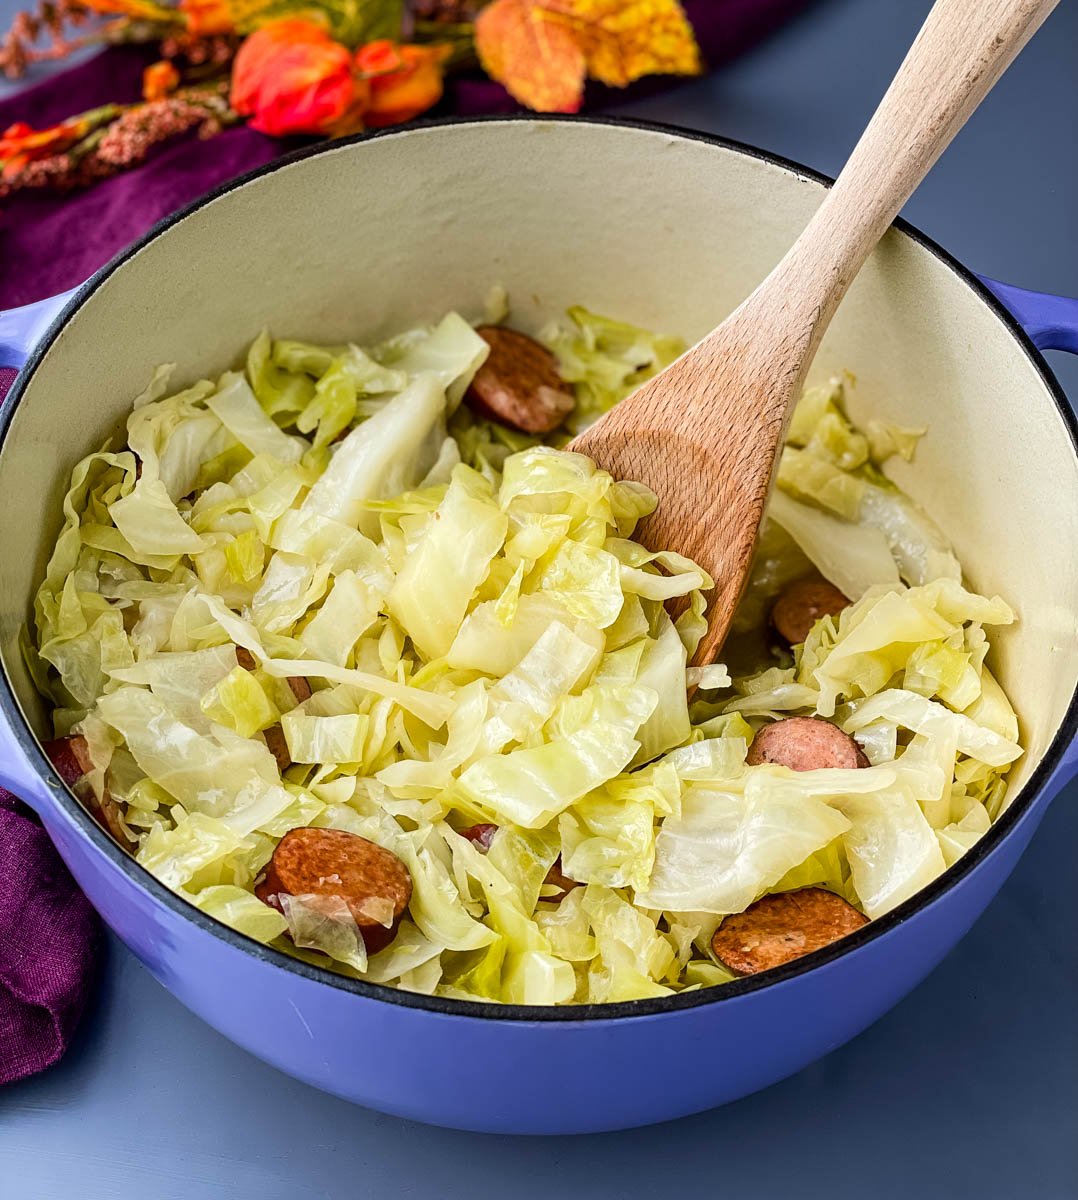 https://www.staysnatched.com/wp-content/uploads/2021/09/southern-soul-food-cabbage-recipe-1.jpg